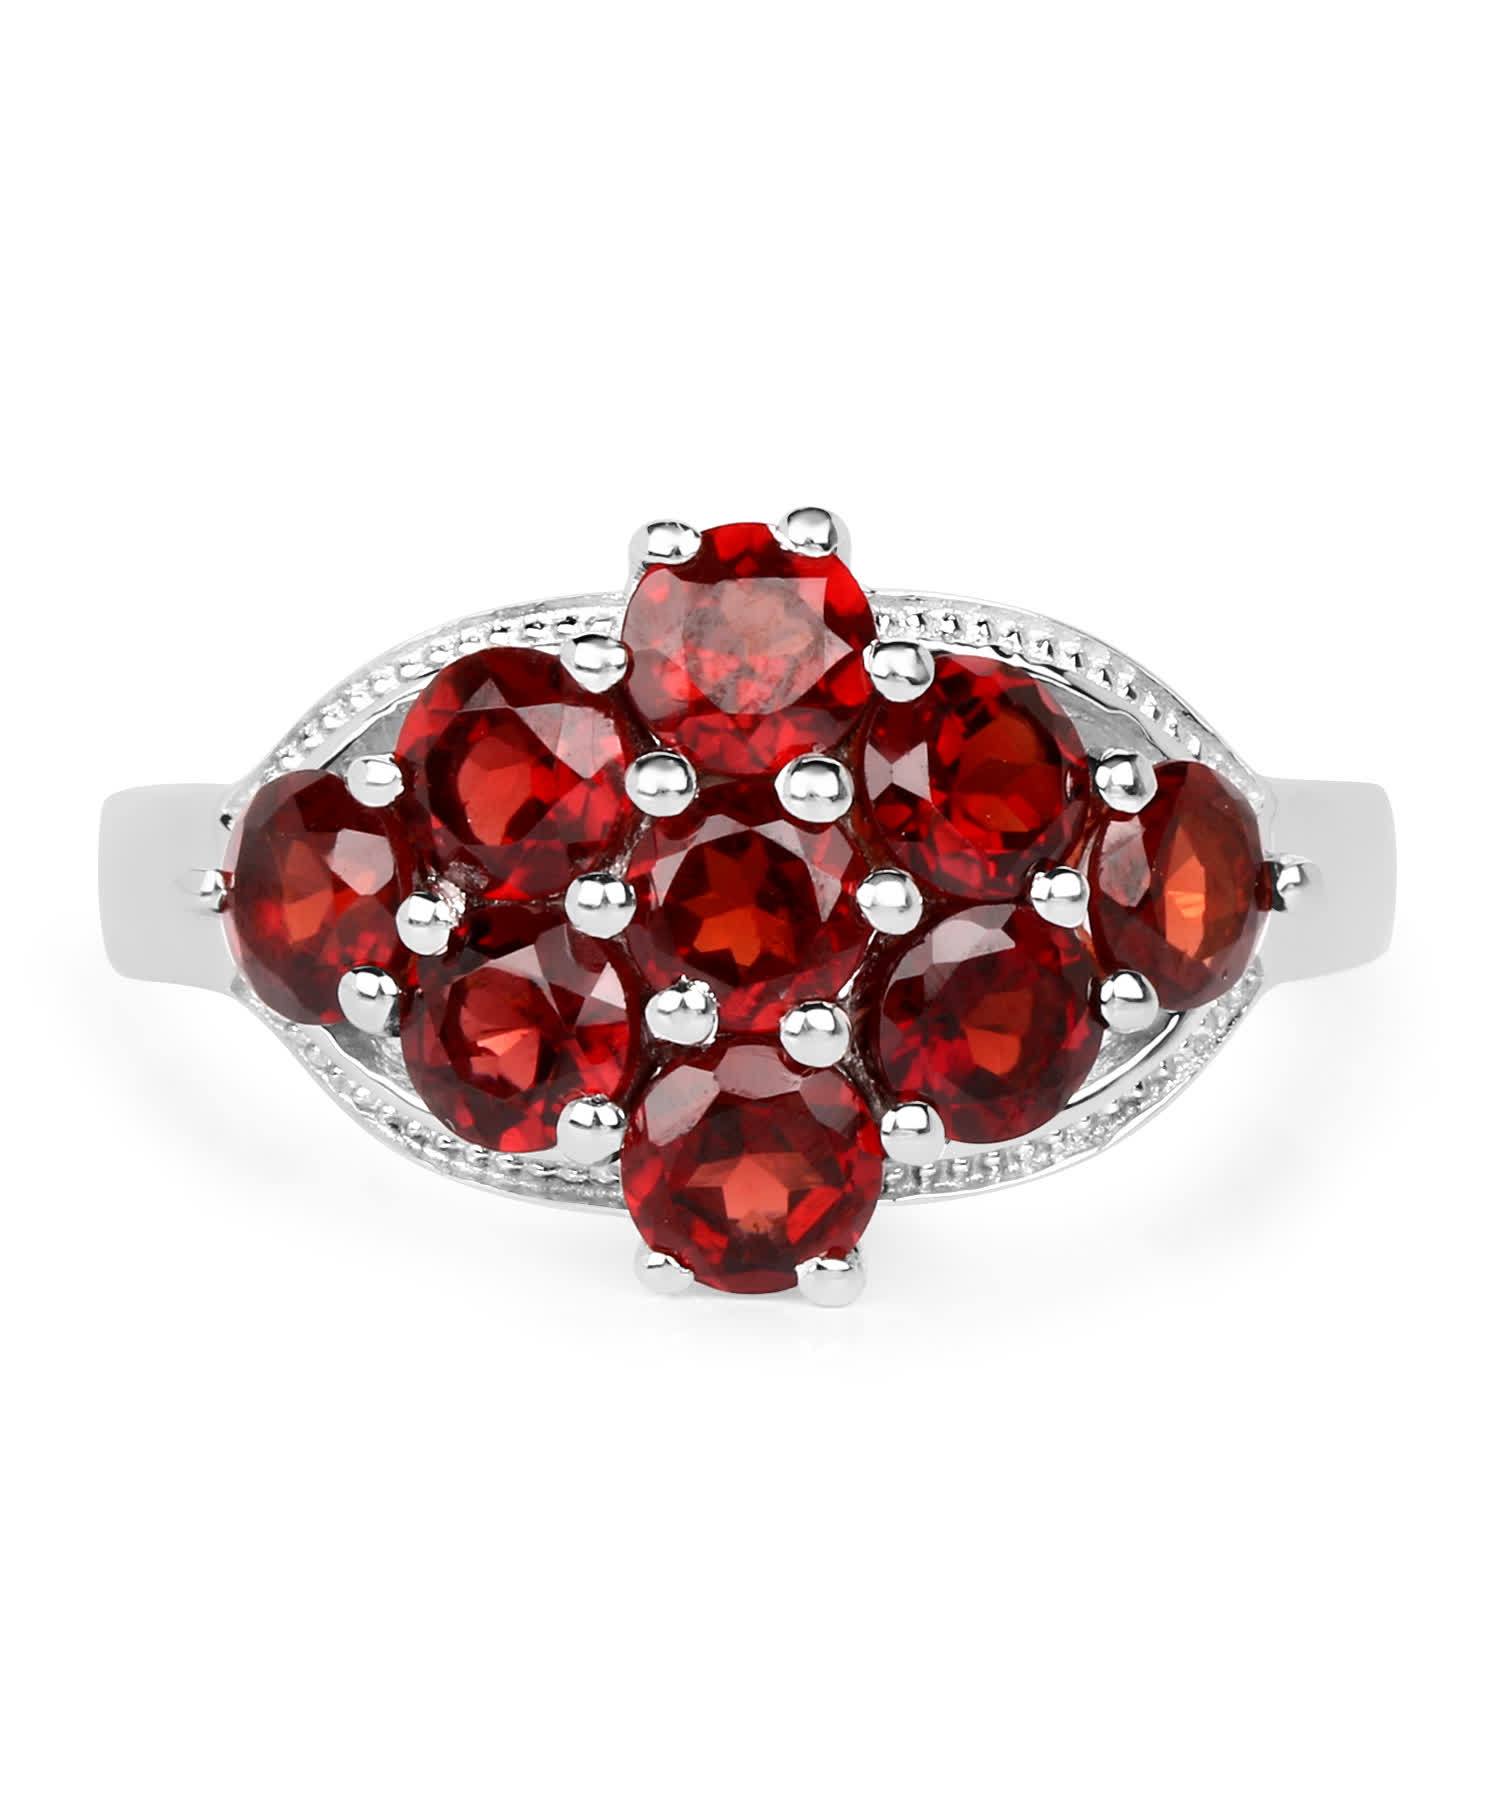 2.88ctw Natural Pomegranate Garnet Rhodium Plated 925 Sterling Silver Right Hand Ring View 3